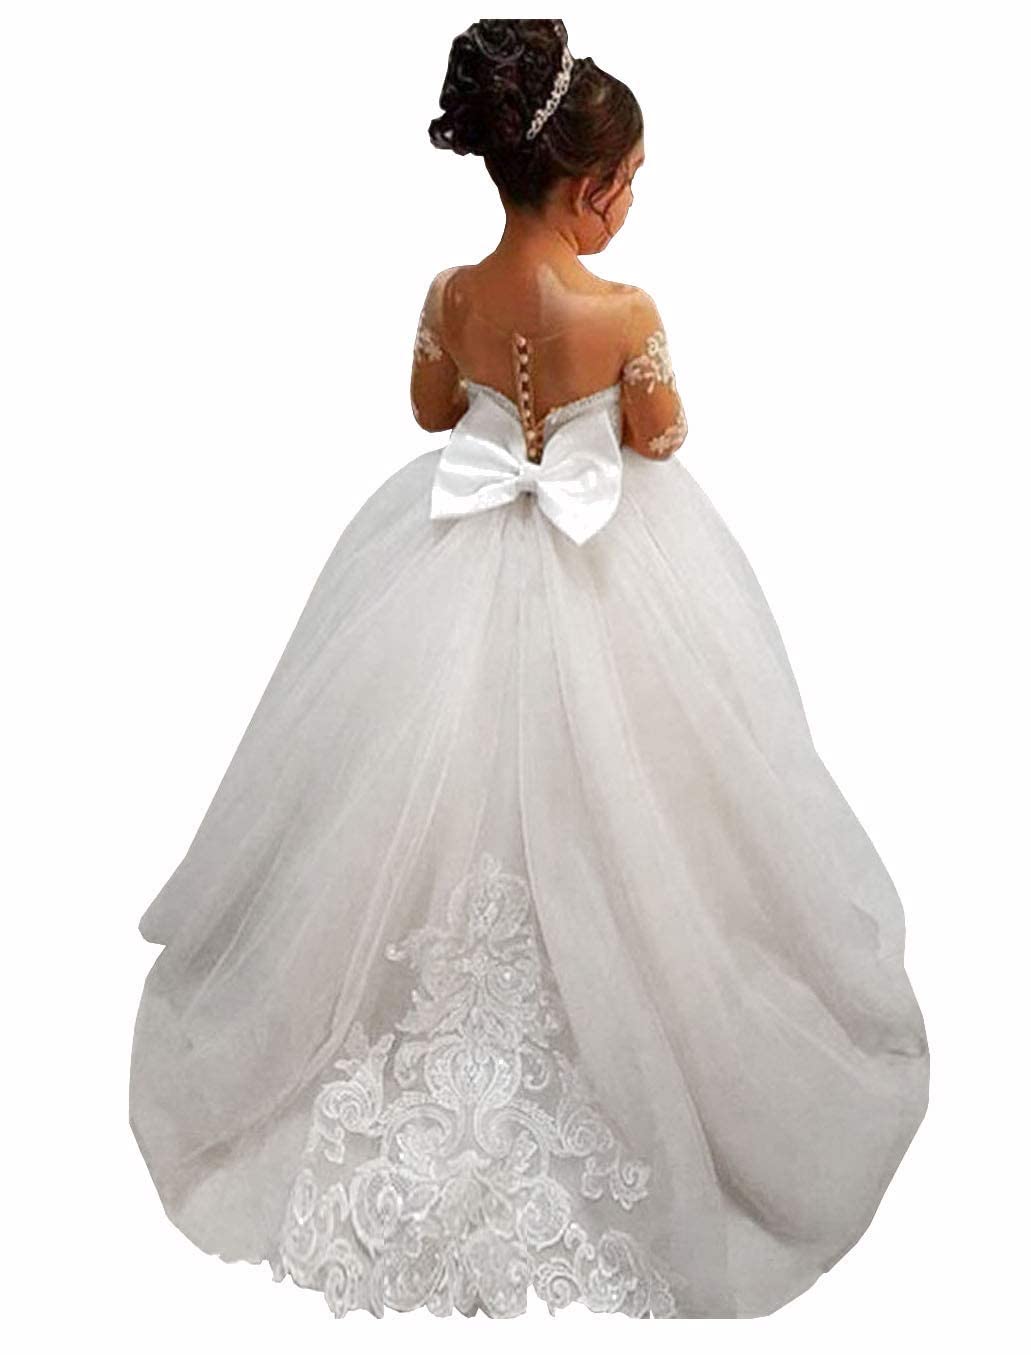 GZY White Ivory Lace Long Sleeve Flower Girl Dresses Princess Gown Pageant Dress GZY202